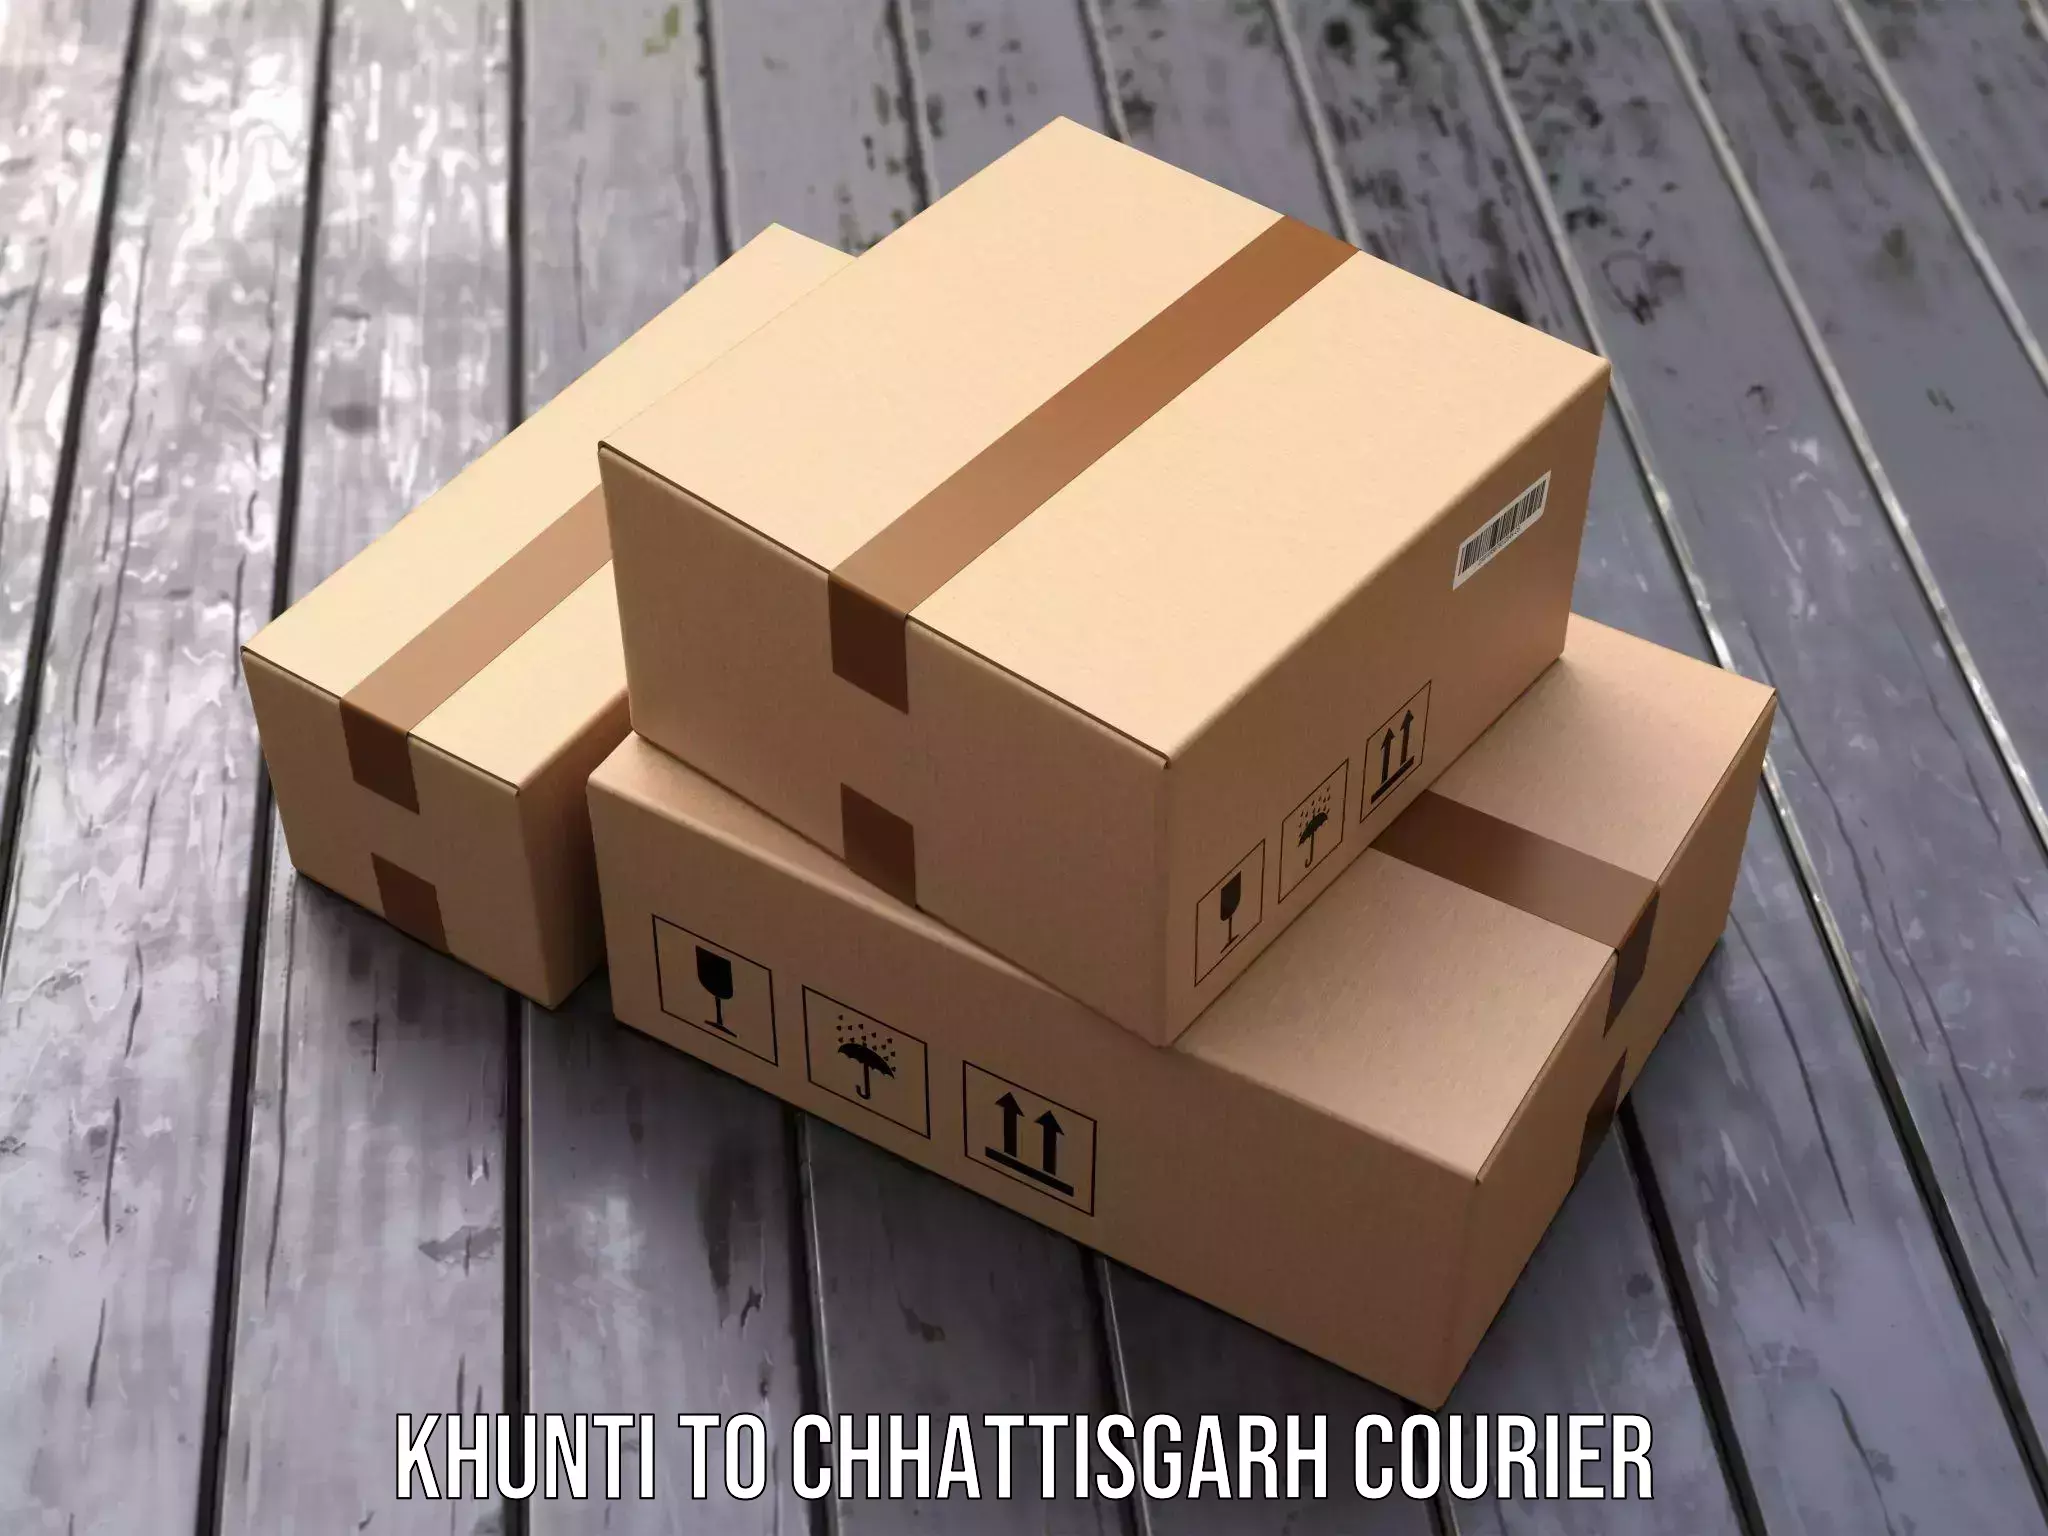 Delivery service partnership Khunti to Raipur